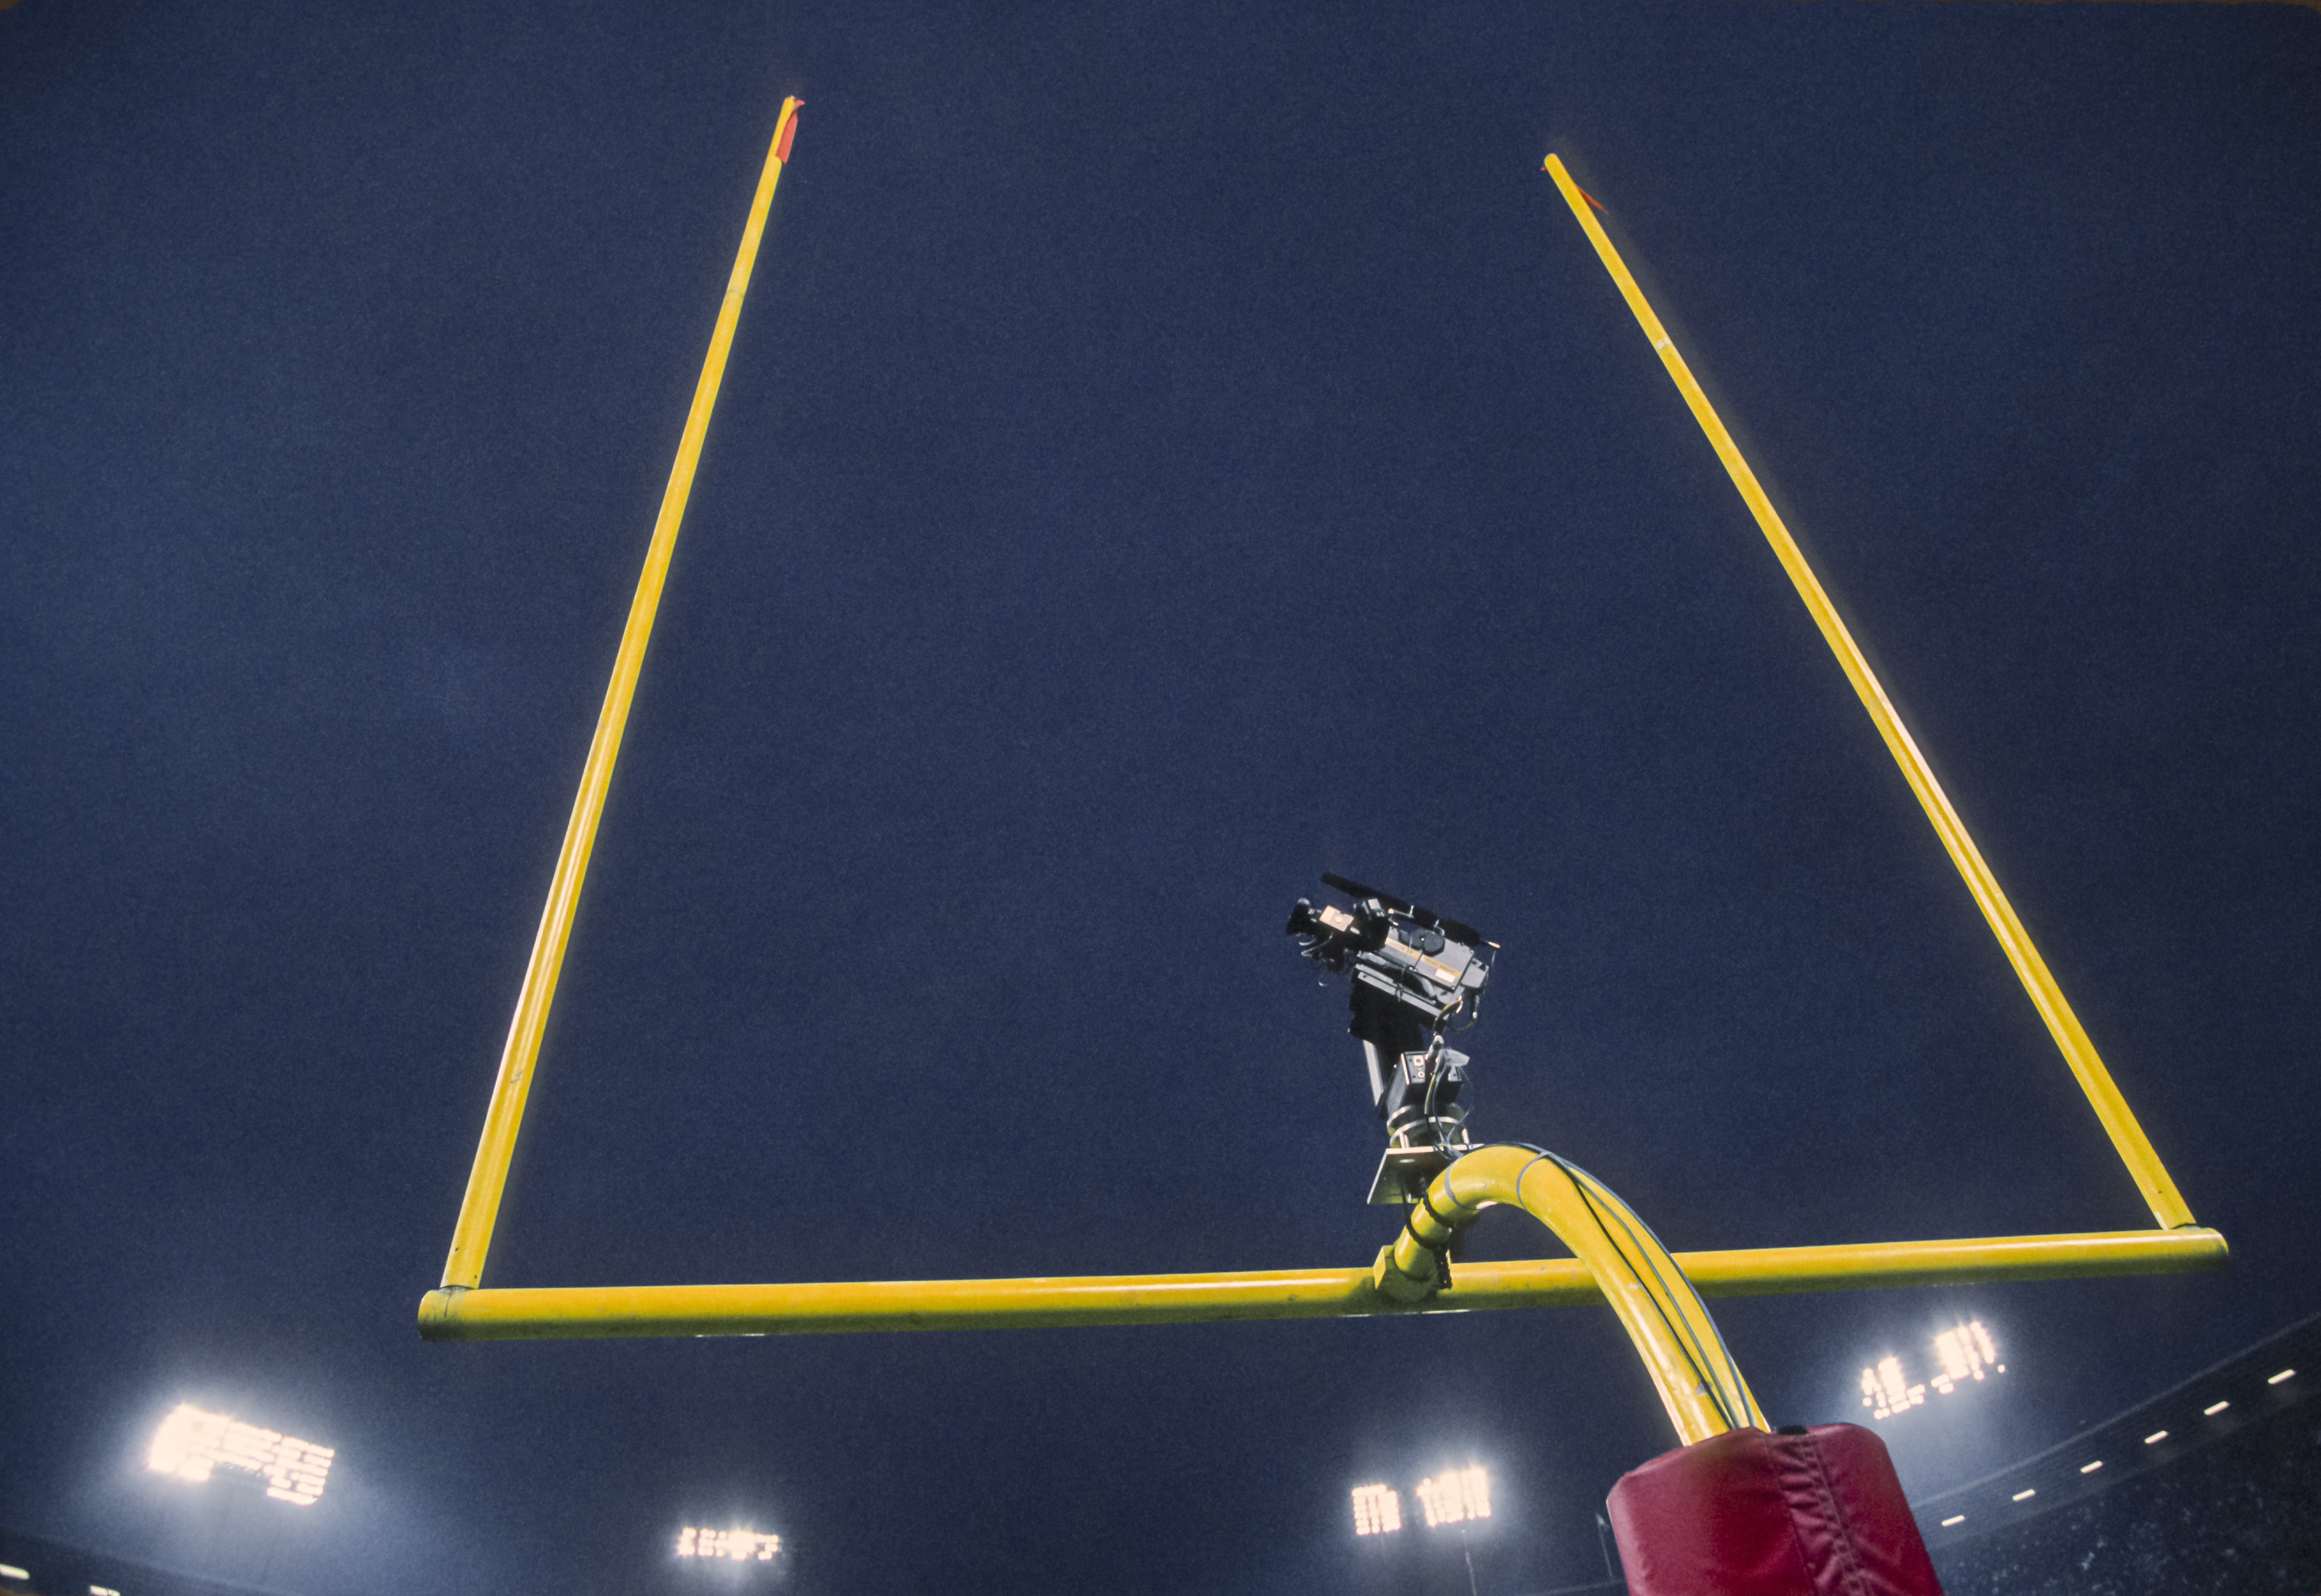 A general view of the goal posts at 3Com Park stadium (formerly known as Candlestick Park) during a Monday Night Football NFL game between the Minnesota Vikings and the San Francisco 49ers played on December 18, 1995 in San Francisco, California.